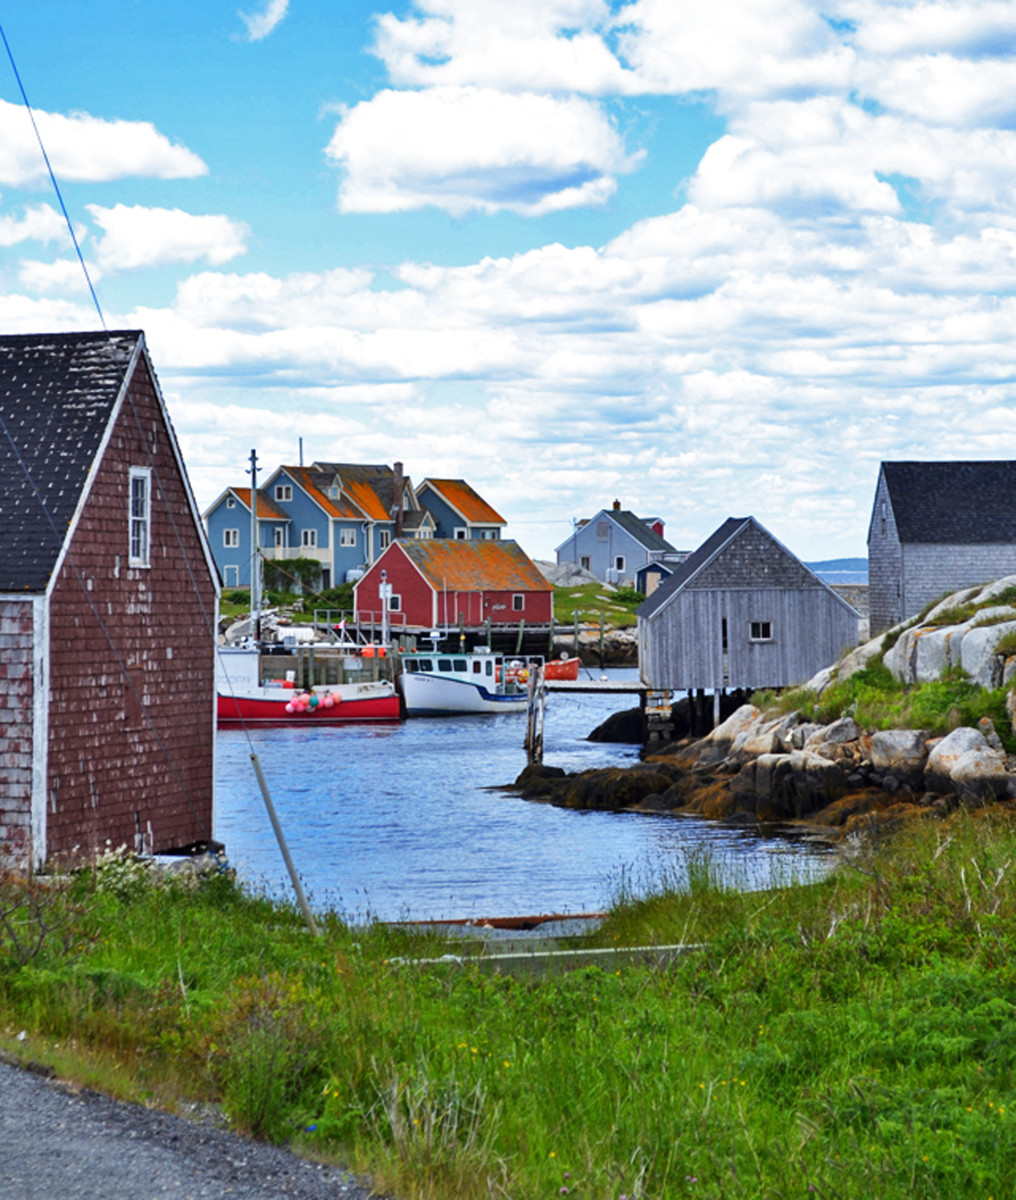 Few places on earth match the sleepy, picturesque fishing village of Peggy’s Cove in Nova Scotia, where you can slice the area’s traditional workboat influence with a butter knife. 